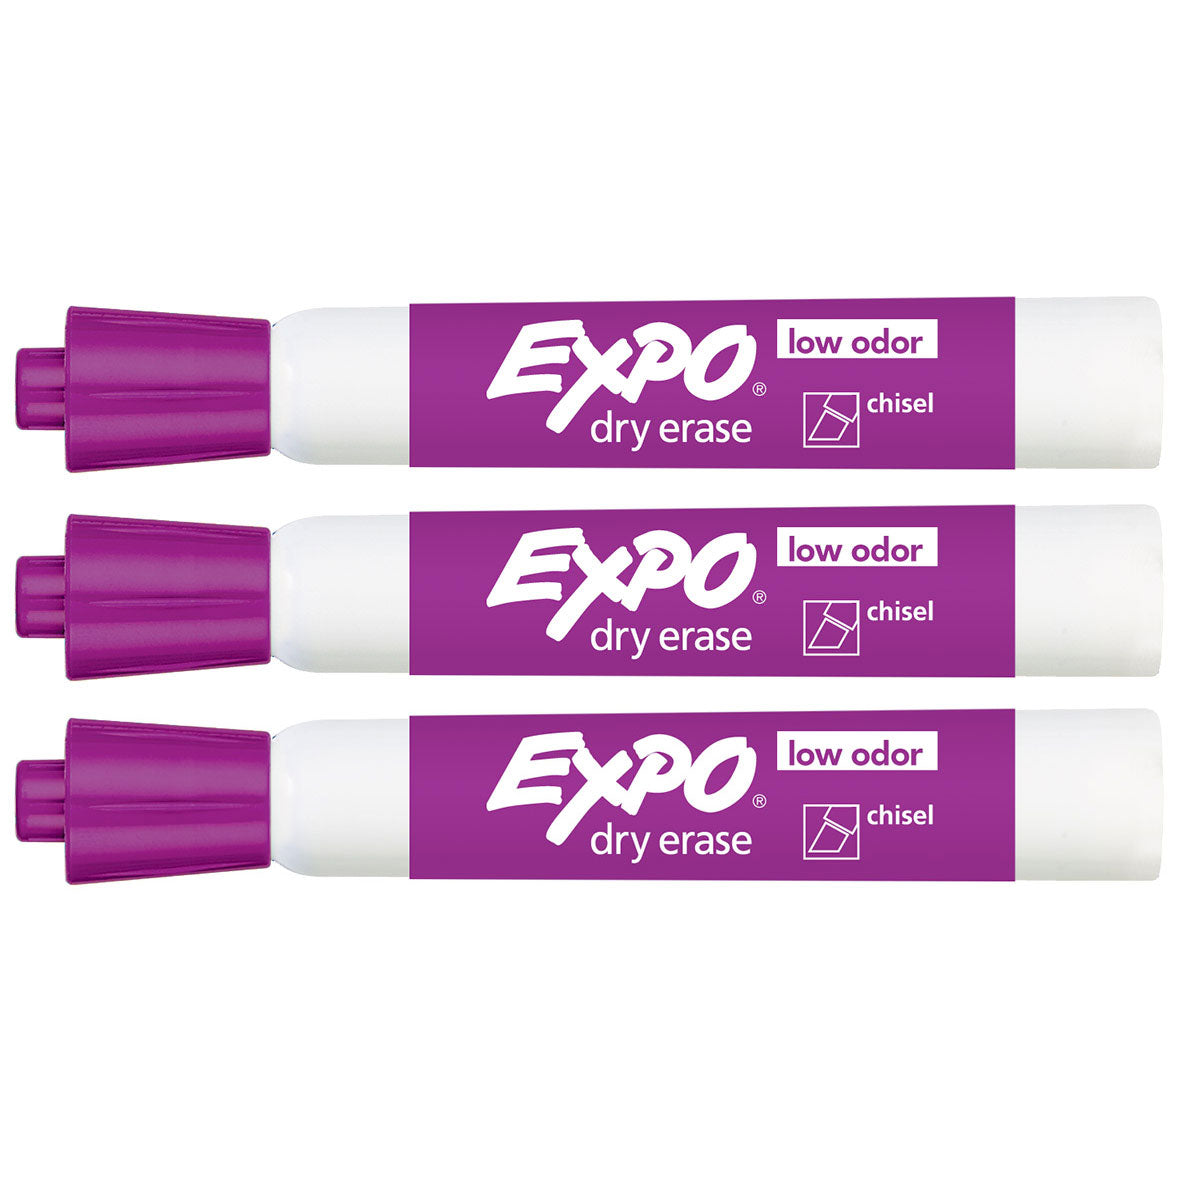 Expo Dry Erase Low Odor Plum Chisel Tip Marker Pack of 3  Expo Dry Erase Markers